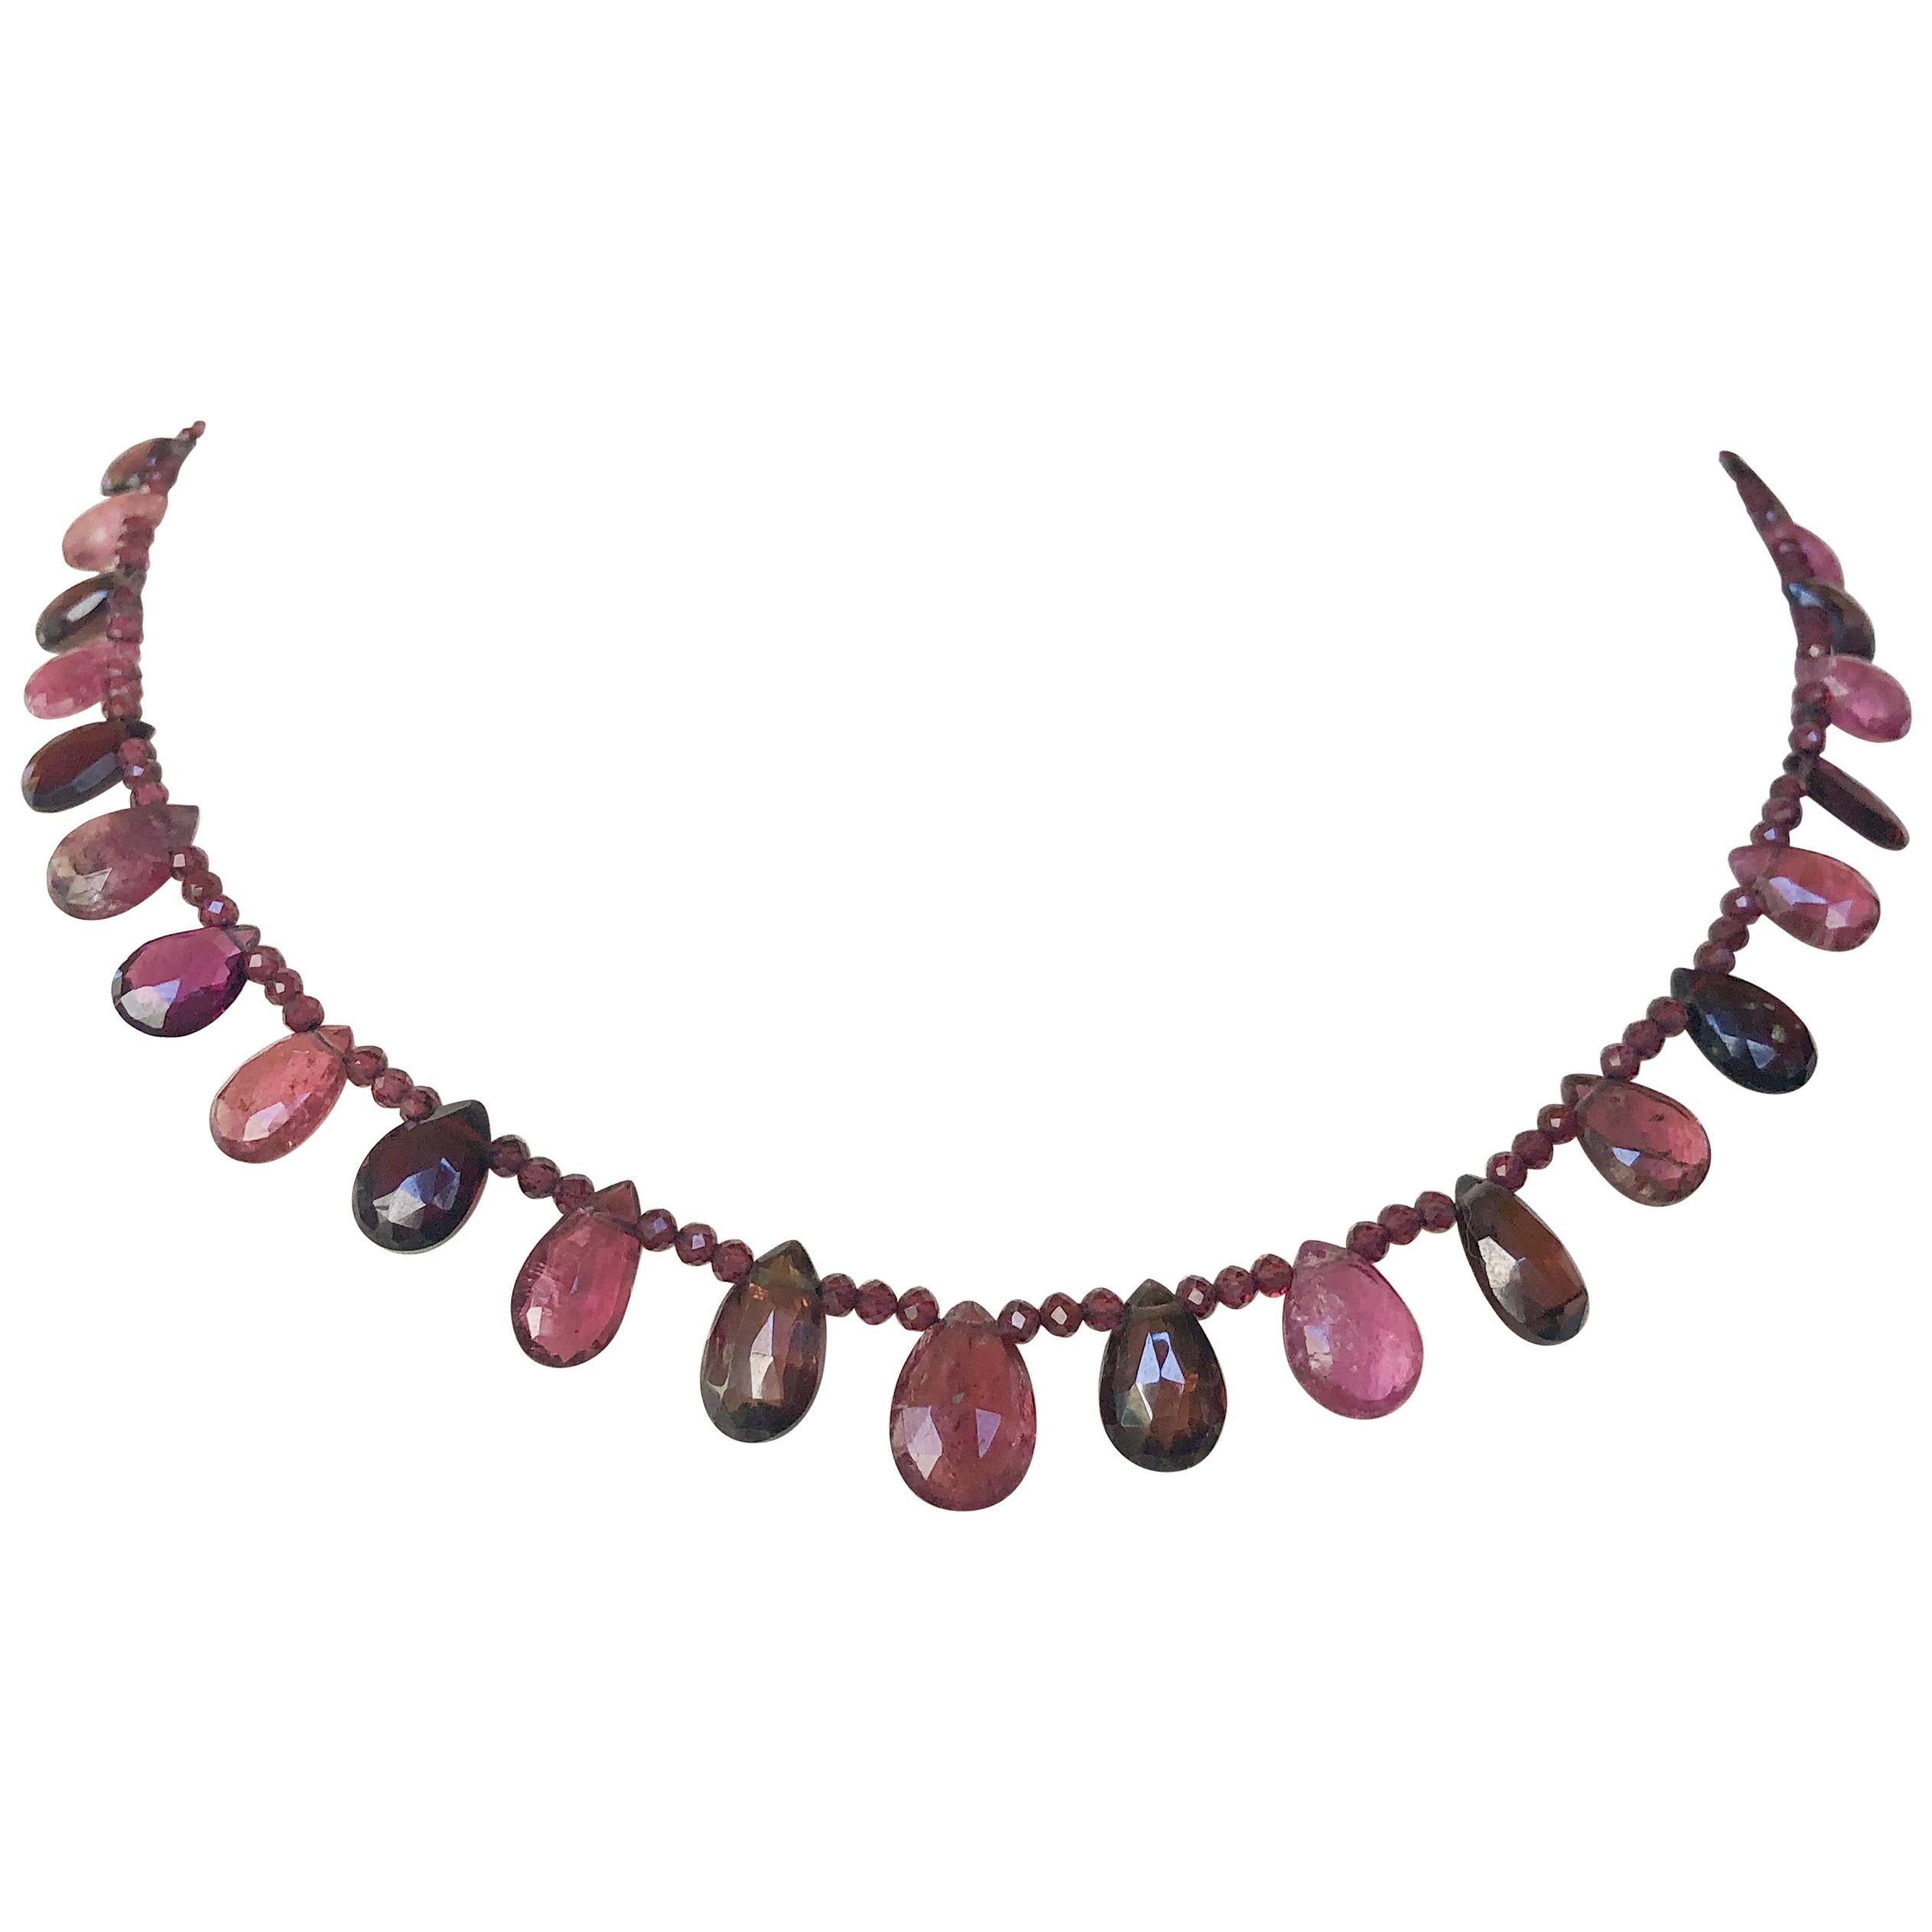 Marina J. Garnet and Multicolored Pink Tourmaline Necklace with Silver Clasp